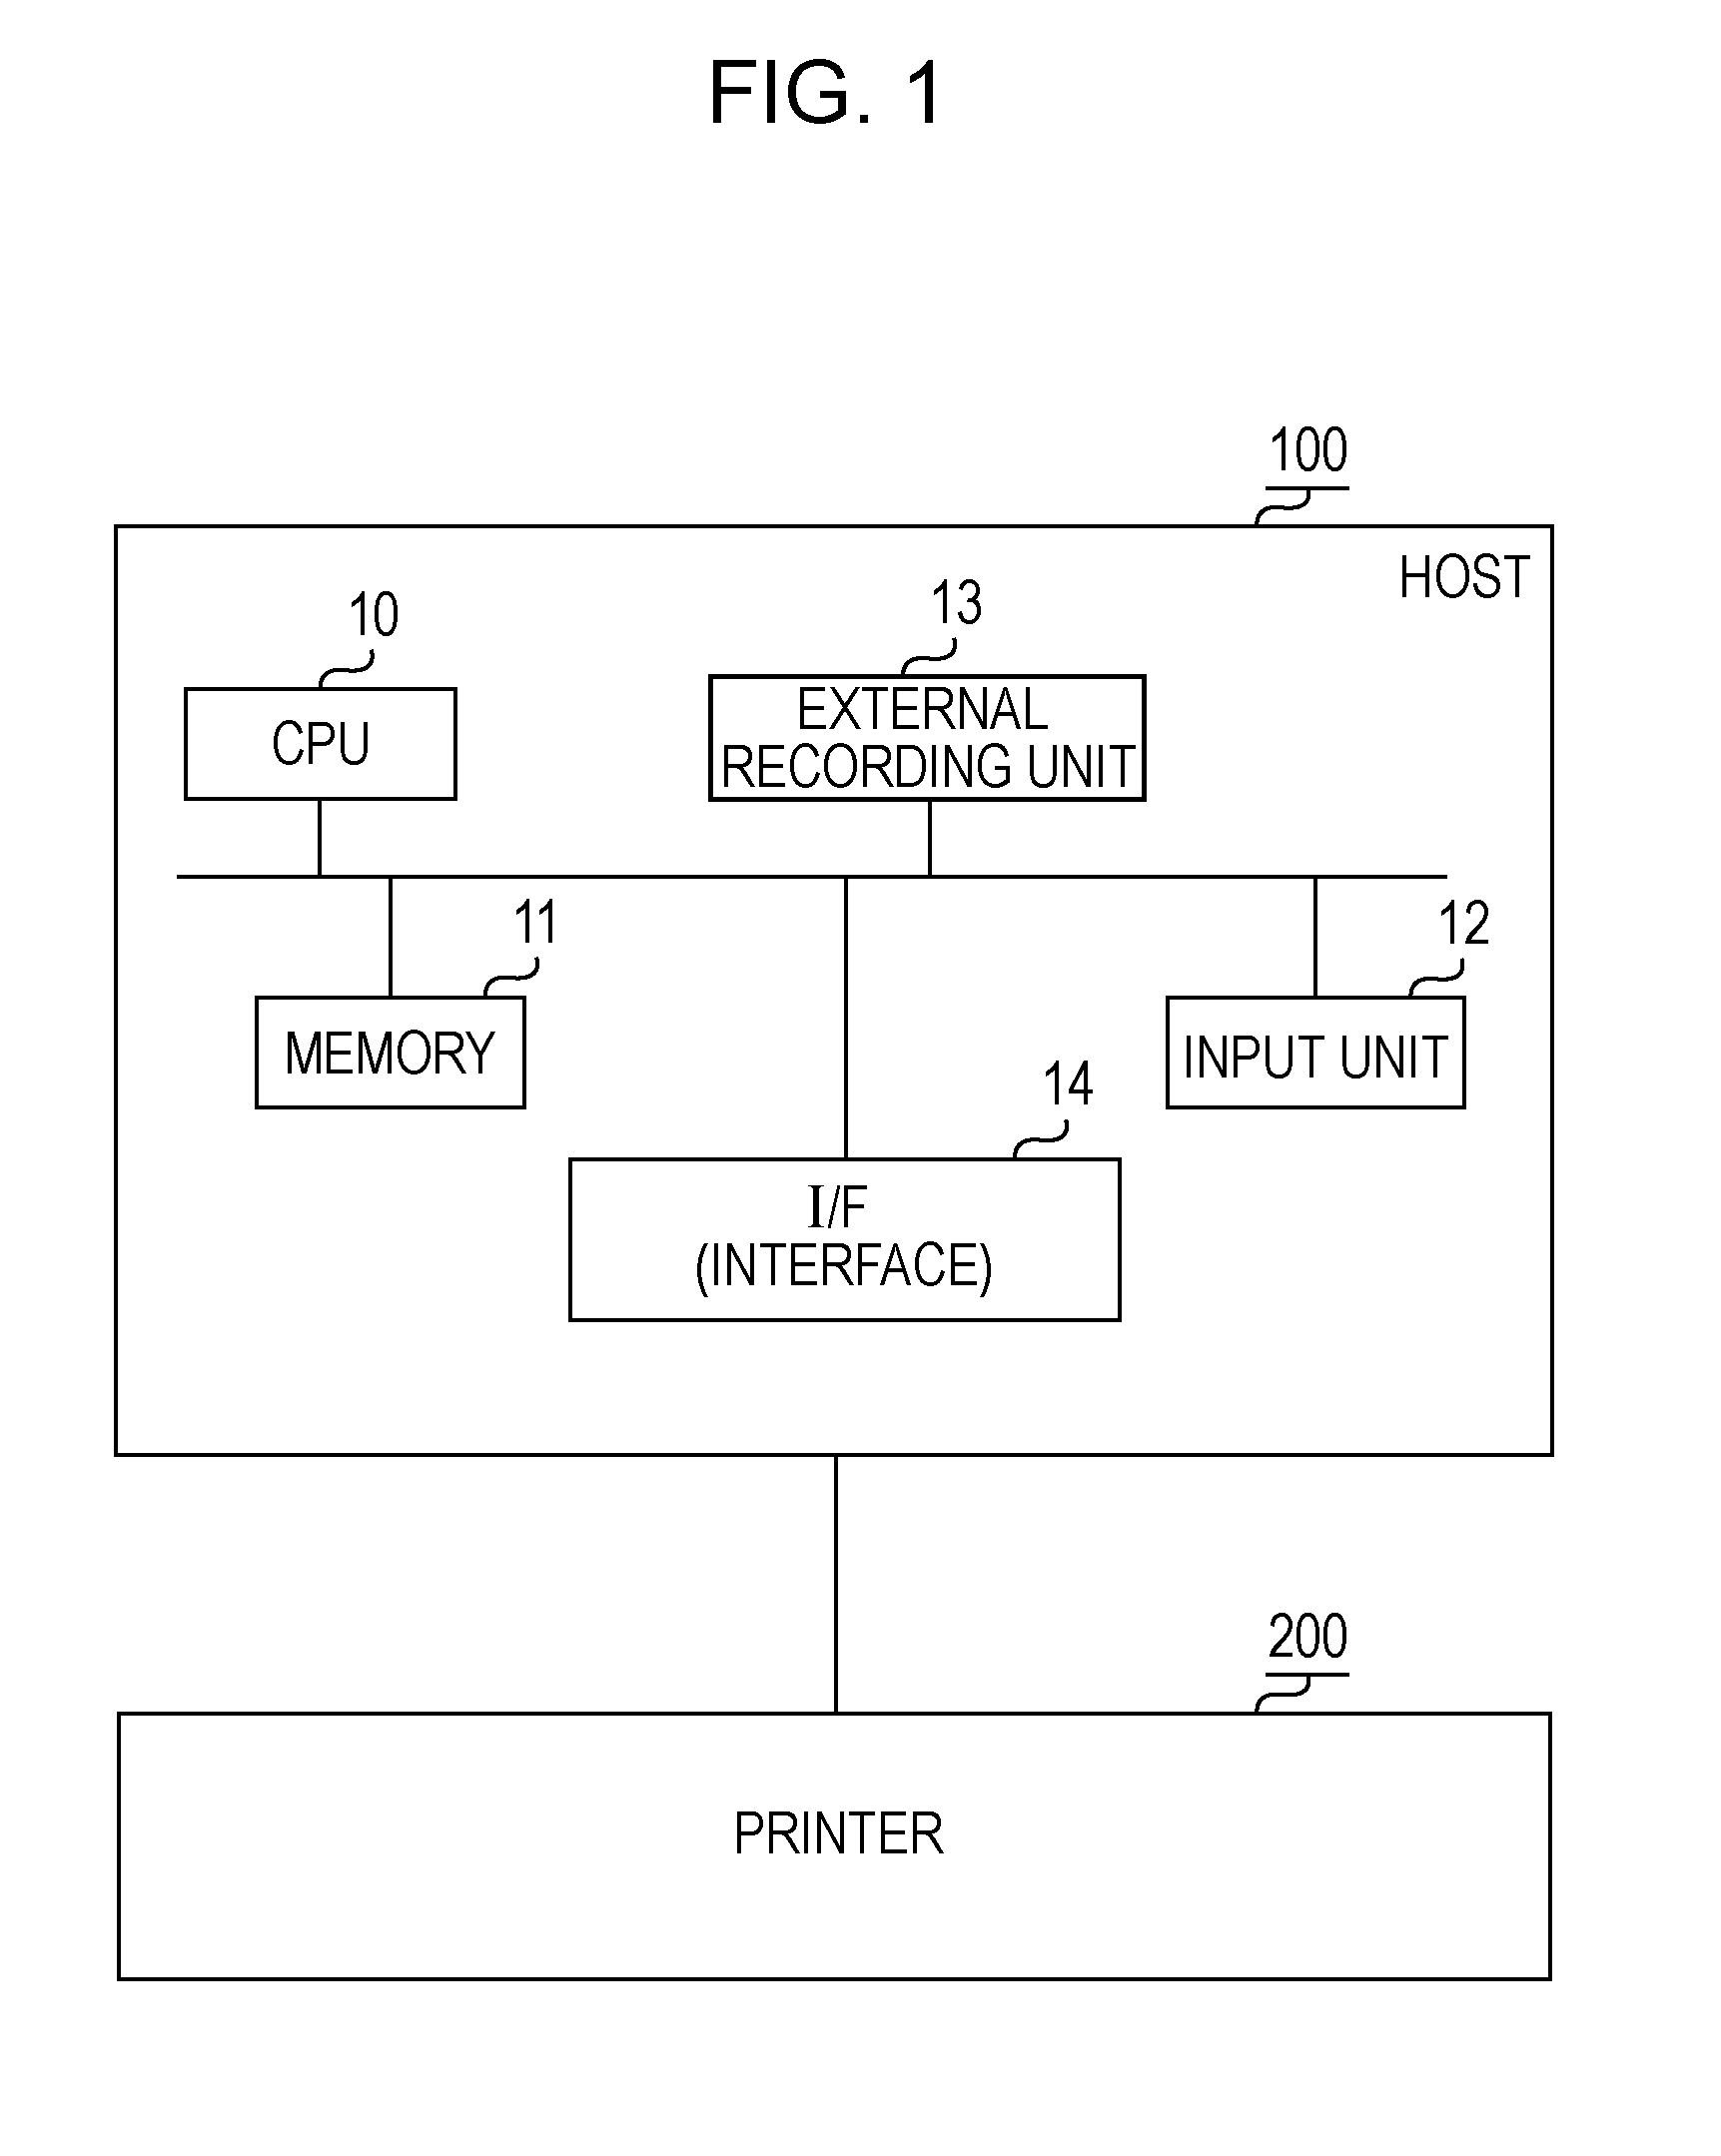 Ink-jet recording device, image processing device and image processing method, for performing sharpness processing of image